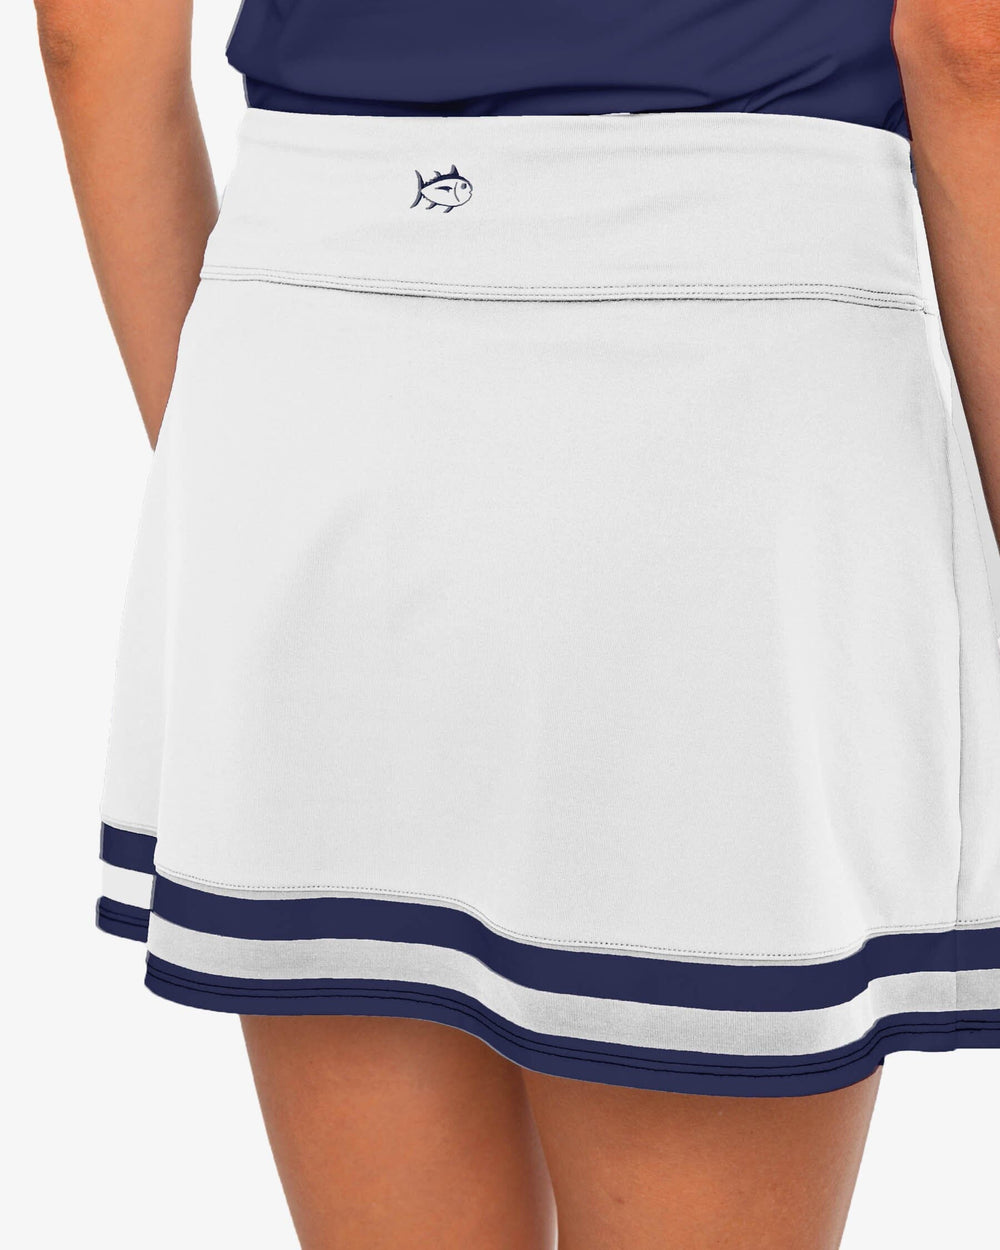 The back view of the Southern Tide Gwen Pleated Performance Skort by Southern Tide - Classic White